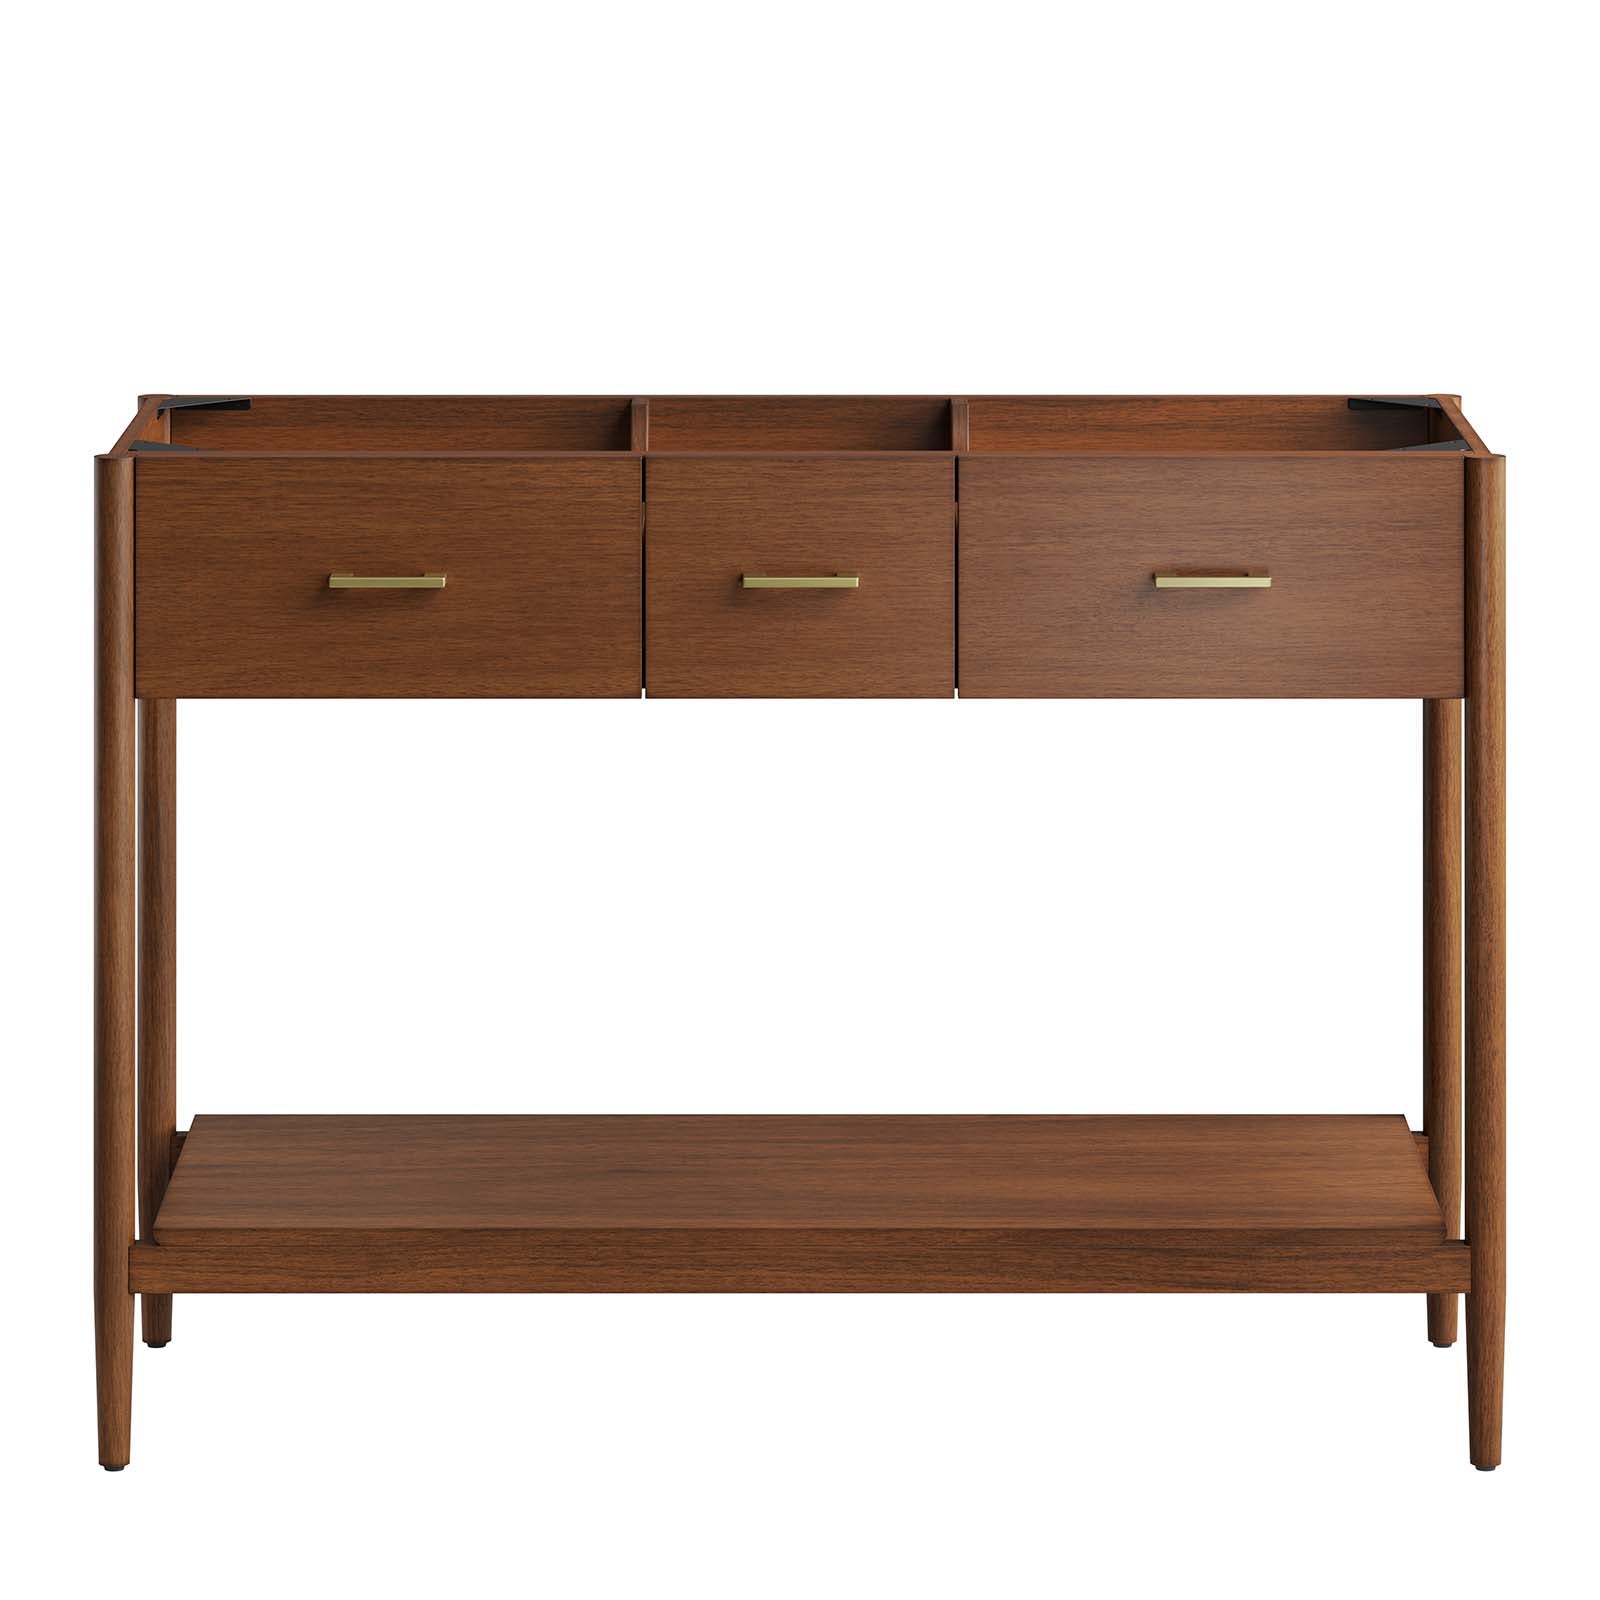 Zaire 48” Double Sink Compatible Bathroom Vanity Cabinet (Sink Basin Not Included) - East Shore Modern Home Furnishings